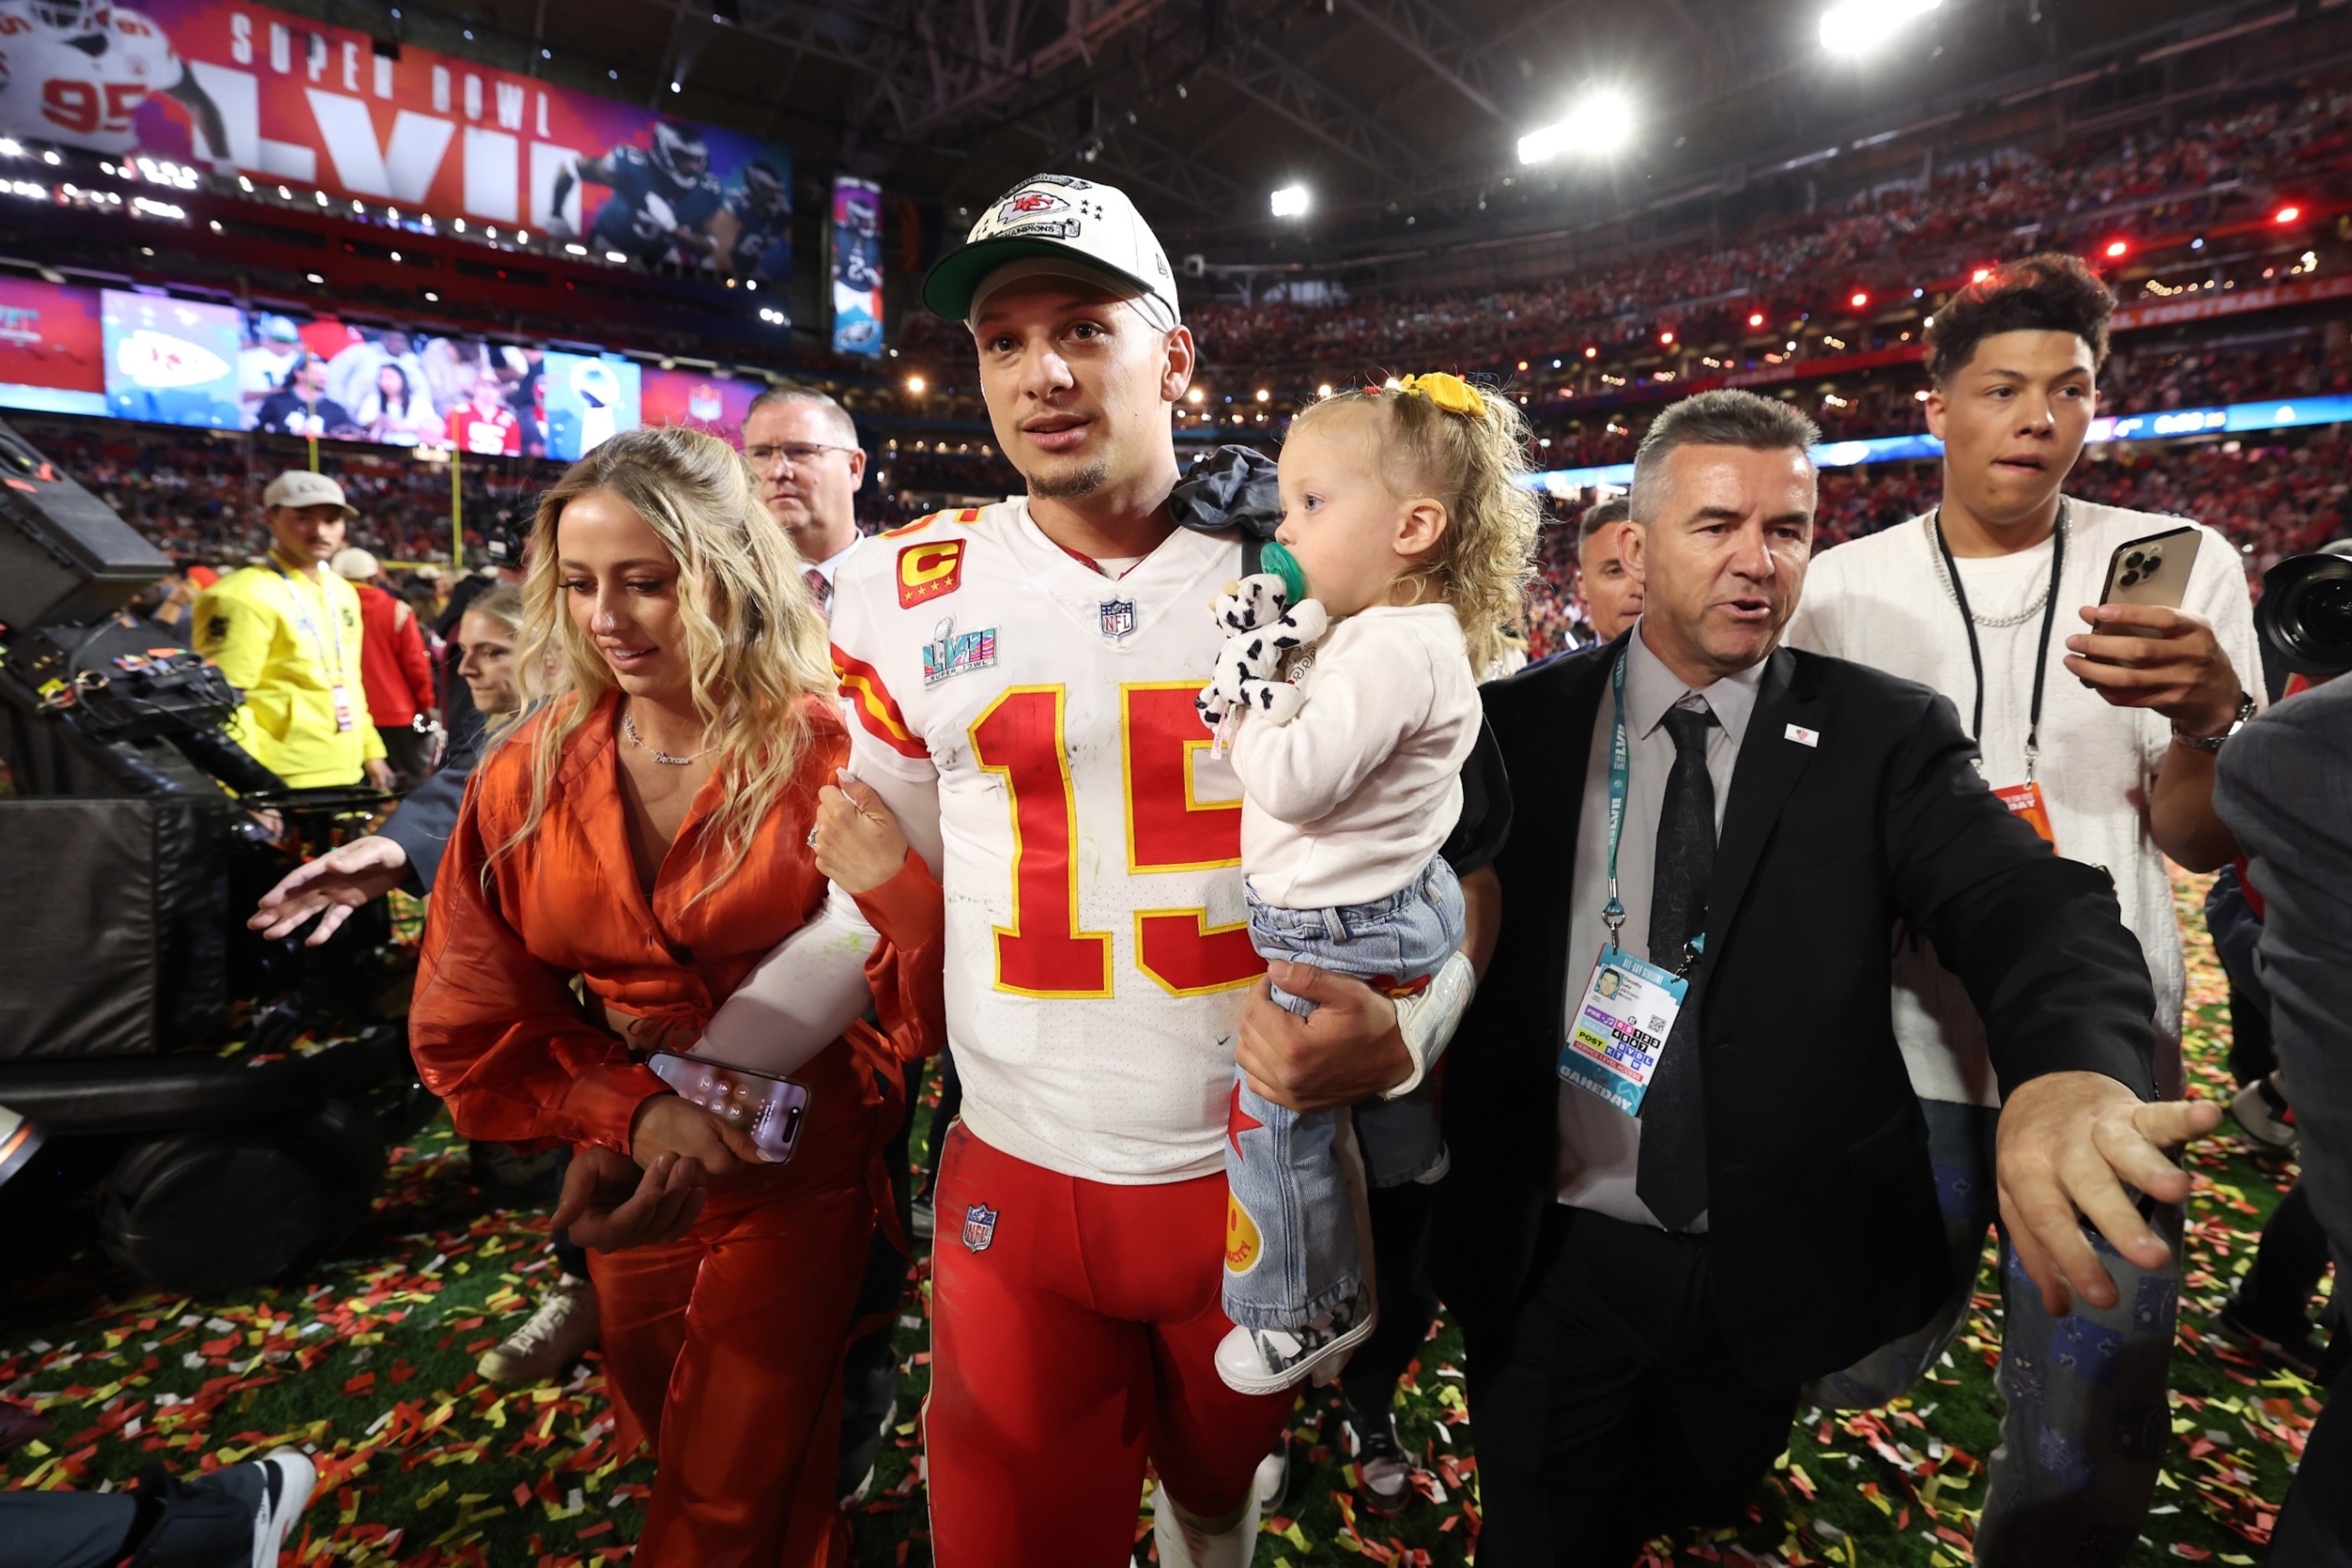 PHOTO: Patrick Mahomes #15 of the Kansas City Chiefs celebrates with his wife Brittany Mahomes and daughter Sterling Skye Mahomes after the Kansas City Chiefs beat the Philadelphia Eagles in Super Bowl LVII, Feb. 12, 2023, in Glendale, Ariz.